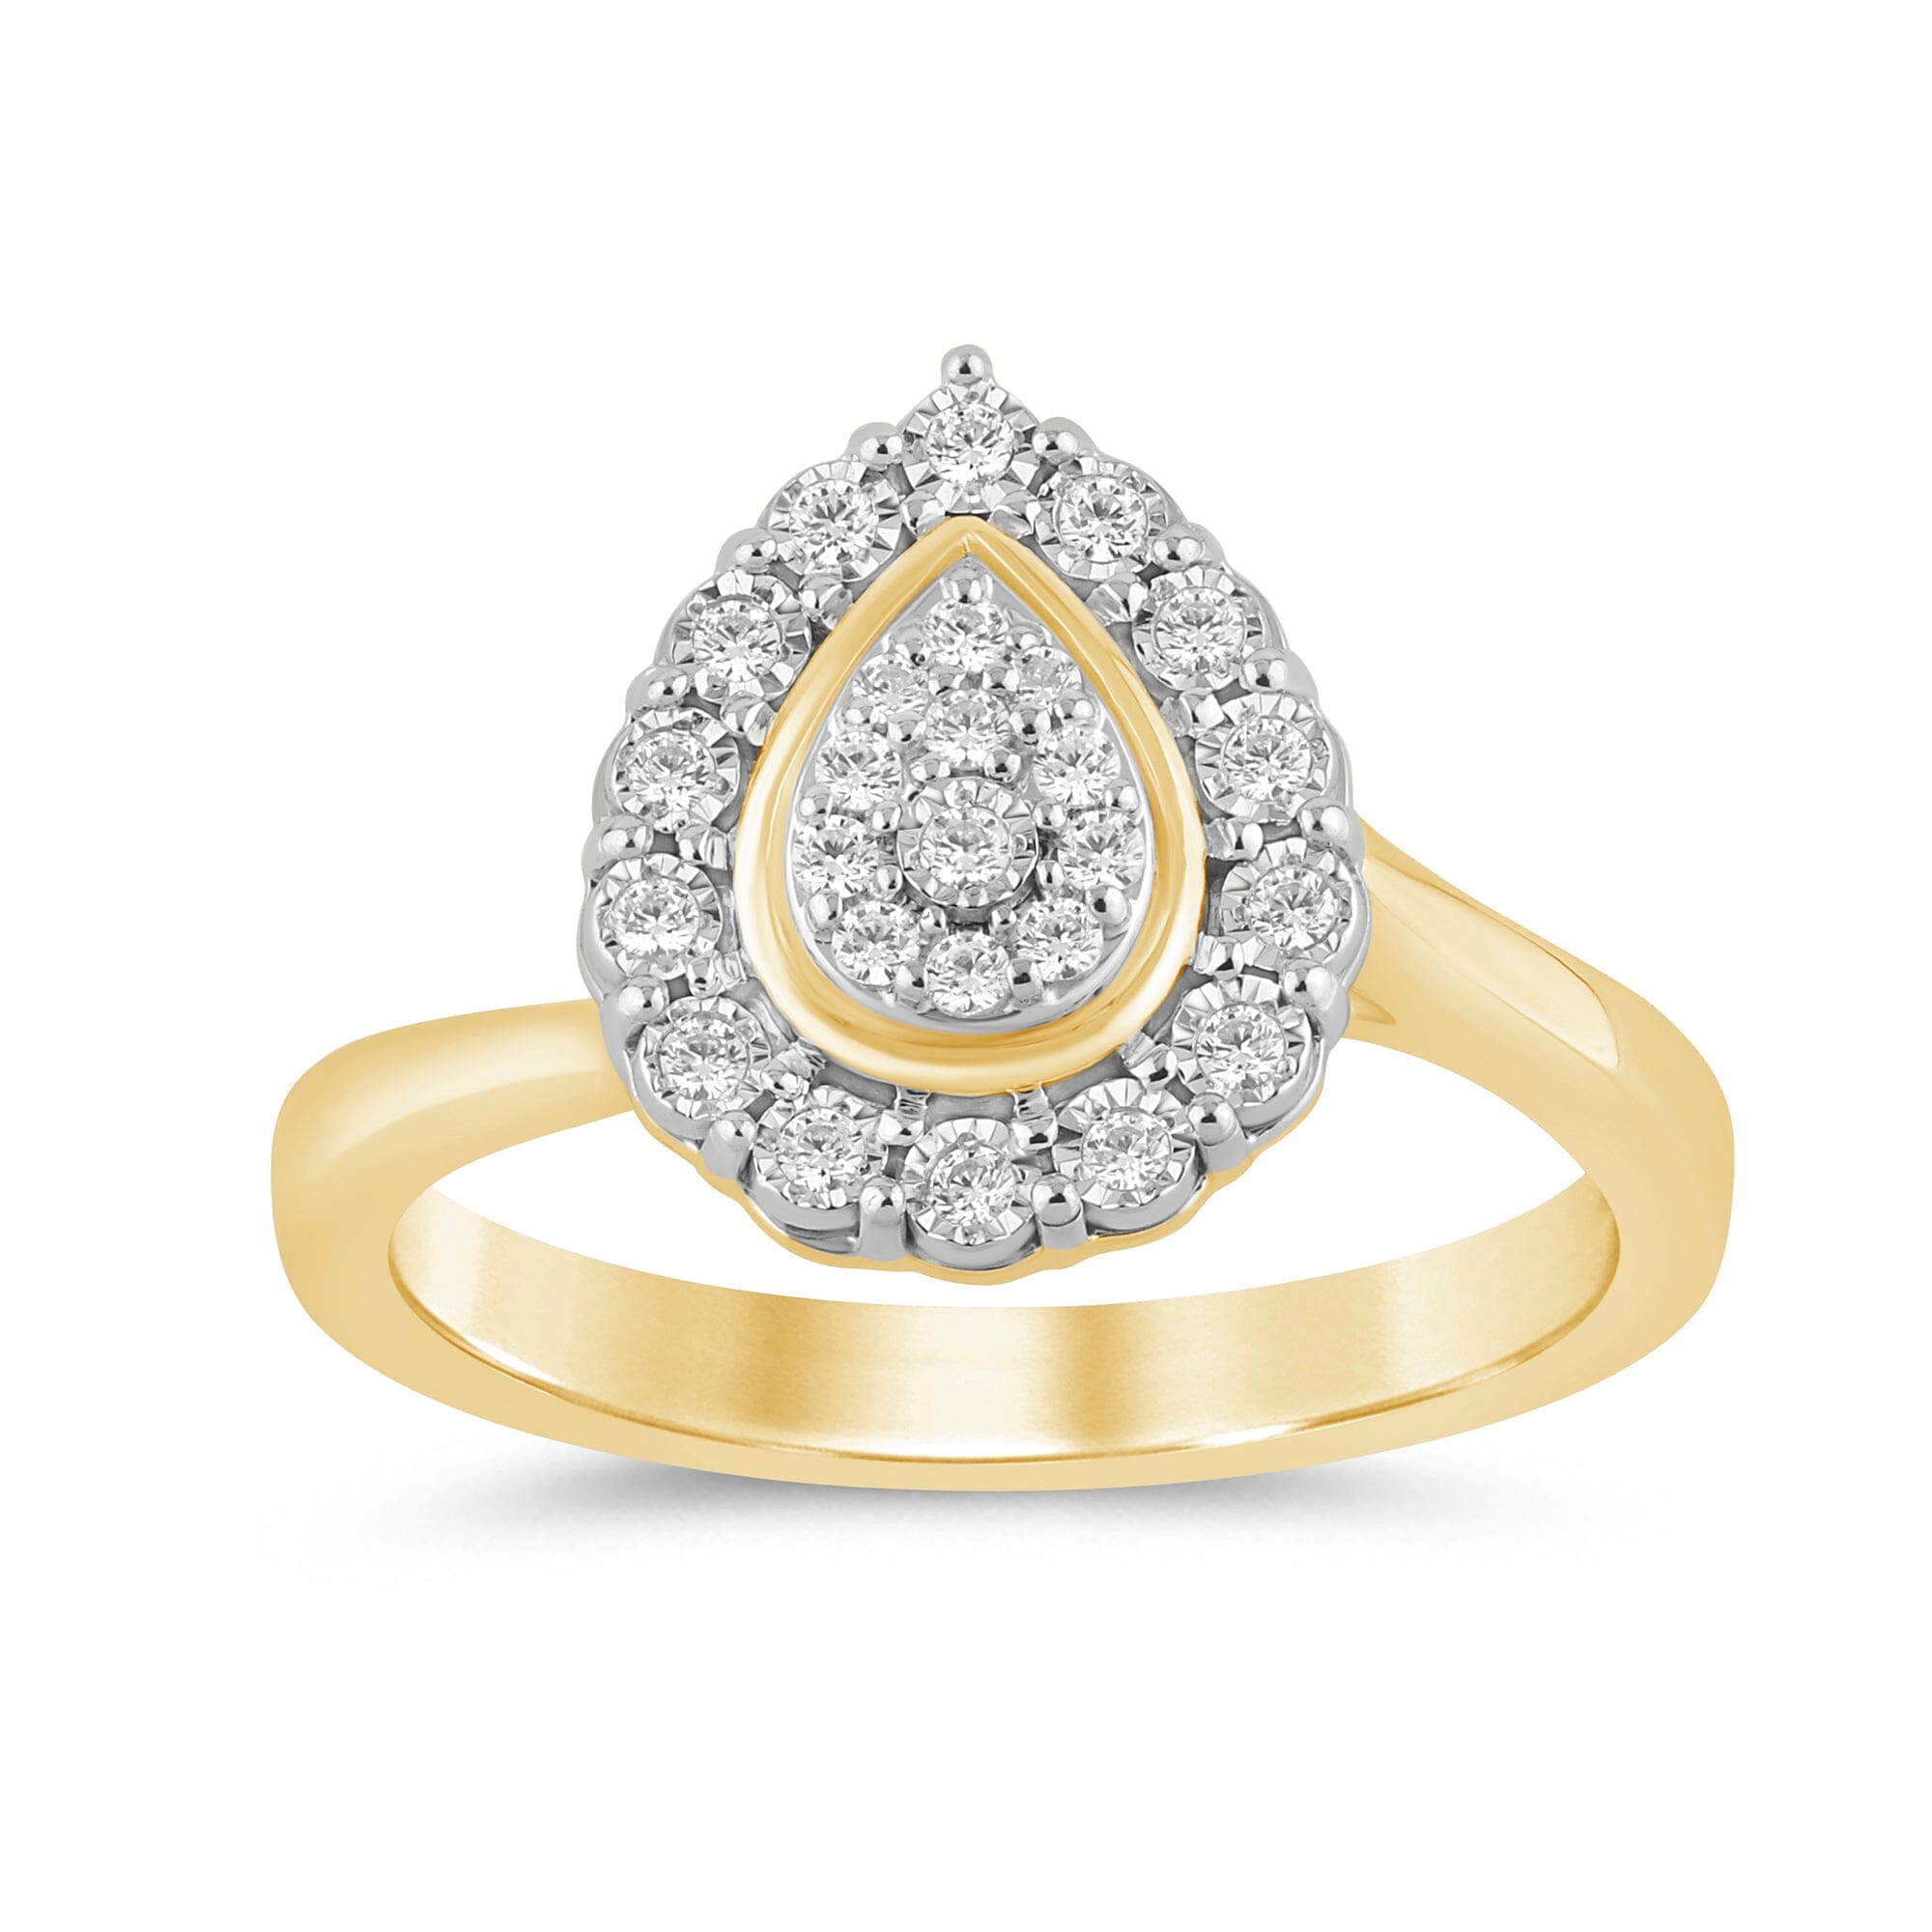 Pear Halo Ring with 0.15ct of Diamonds in 9ct Yellow Gold Rings Bevilles 